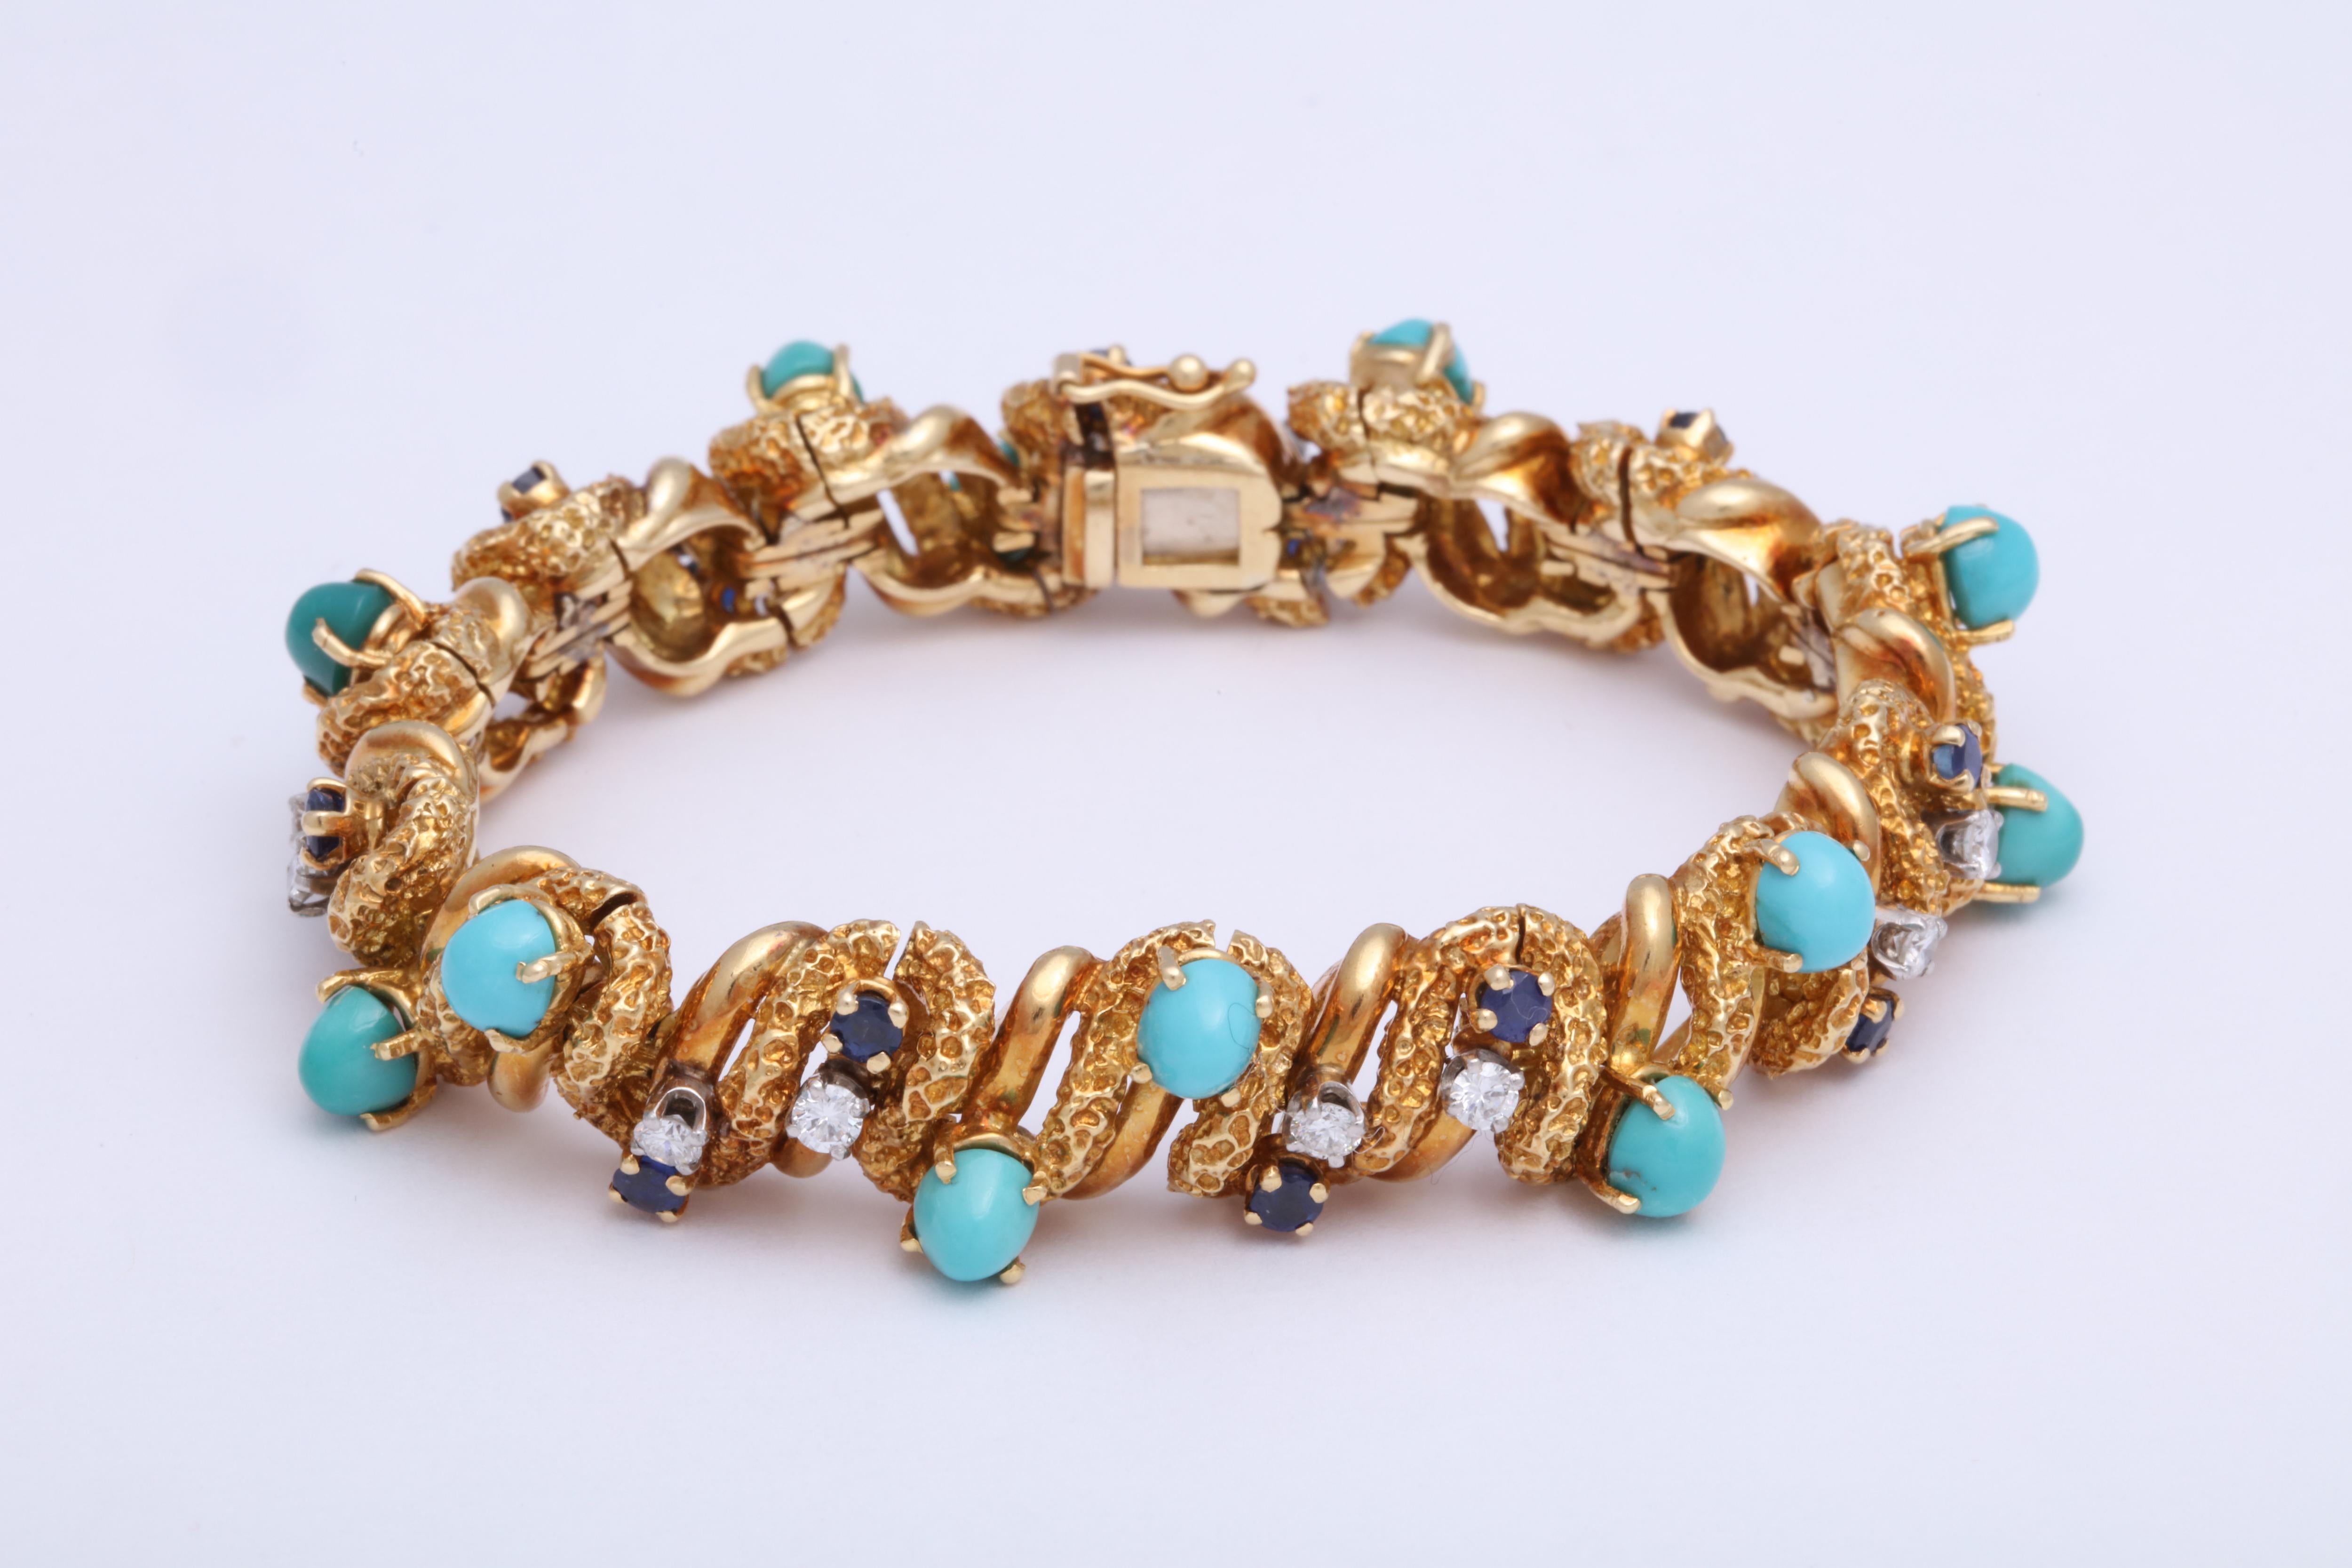 Chased and Polished 18kt Yellow Gold Bracelet set with 14 full cut Diamonds, 14 cabochon Turquoise  and 14 faceted  Sapphires - all prong set and making a medley of alternating colors.  
So -1950's - leaping into the 60's and inching  from prim and